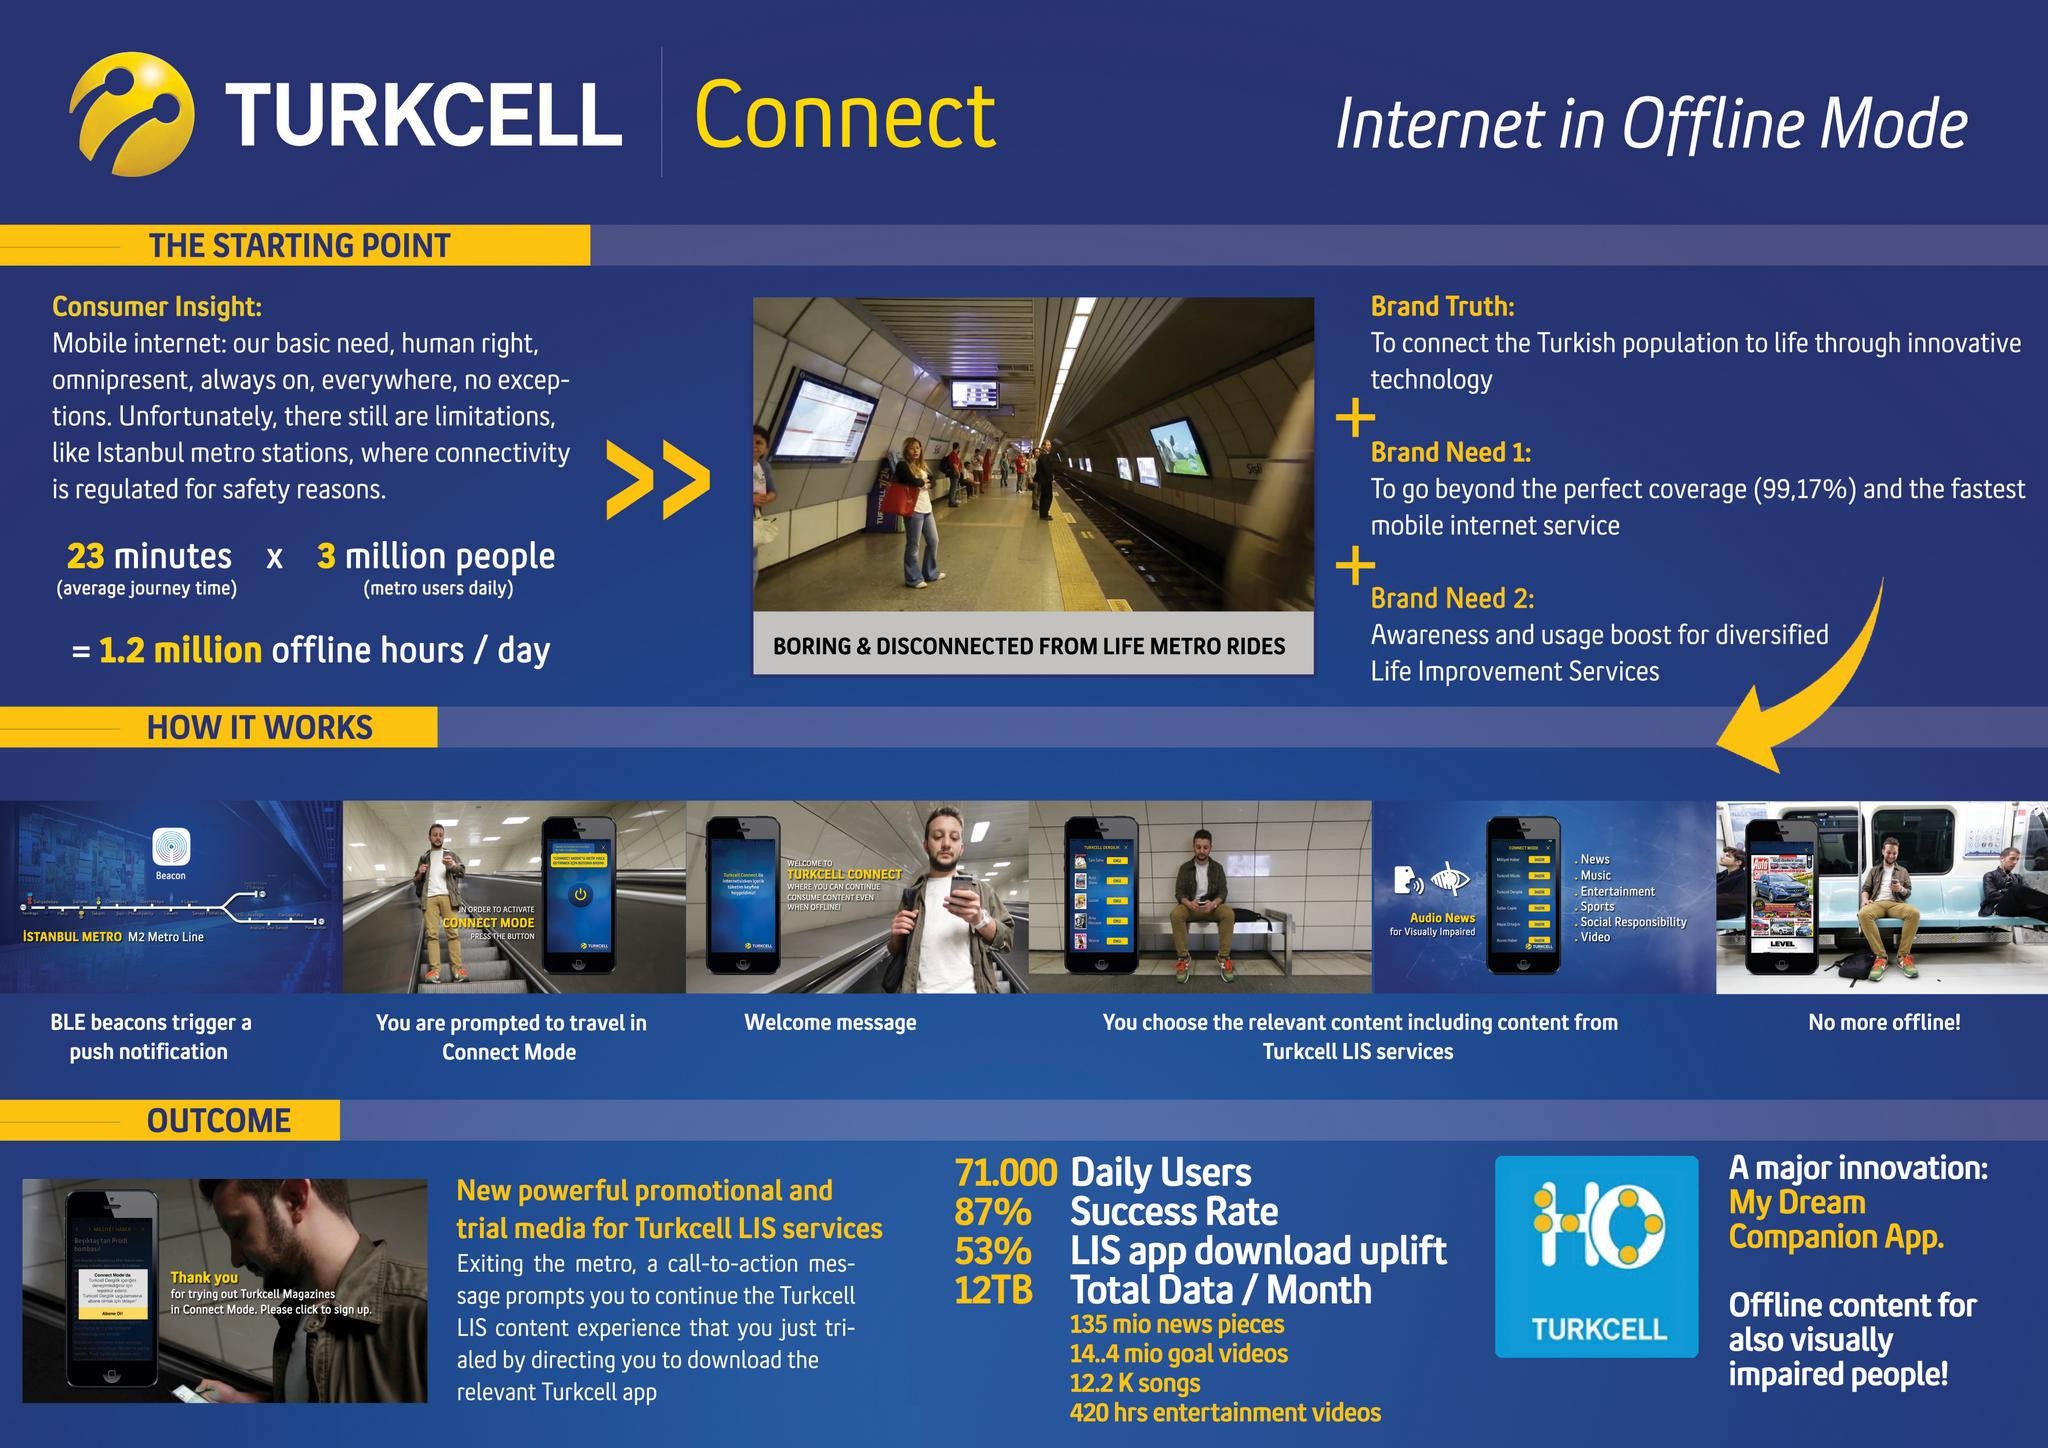 Turkcell Connect: Internet in Offline Mode